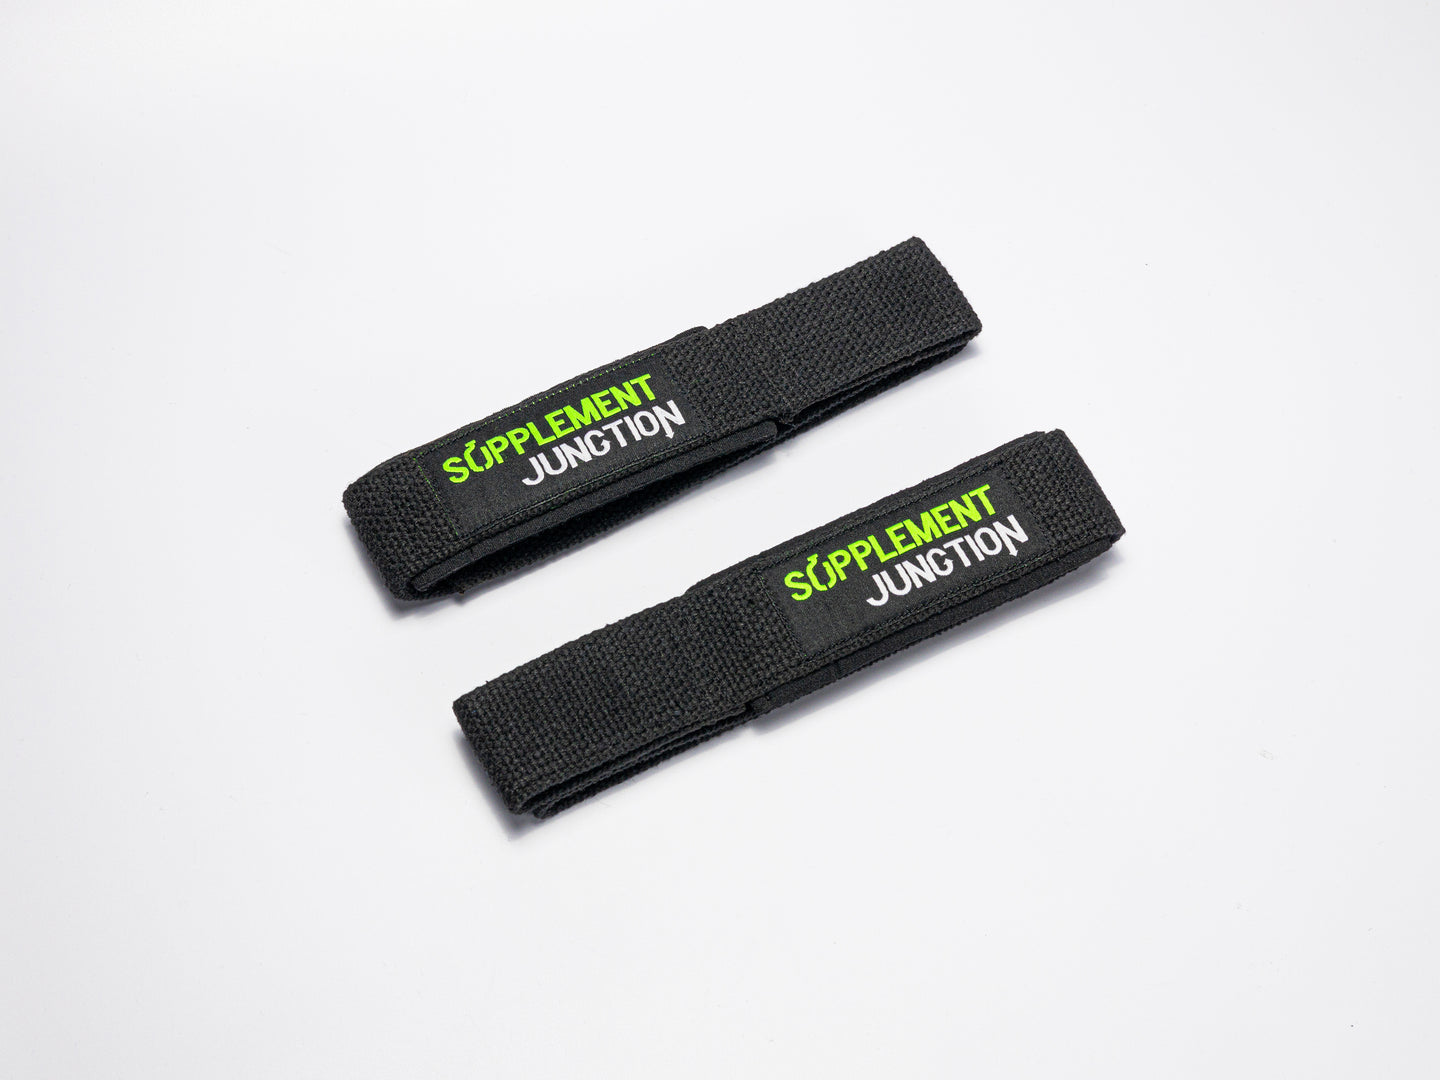 Supplement Junction Lifting Straps